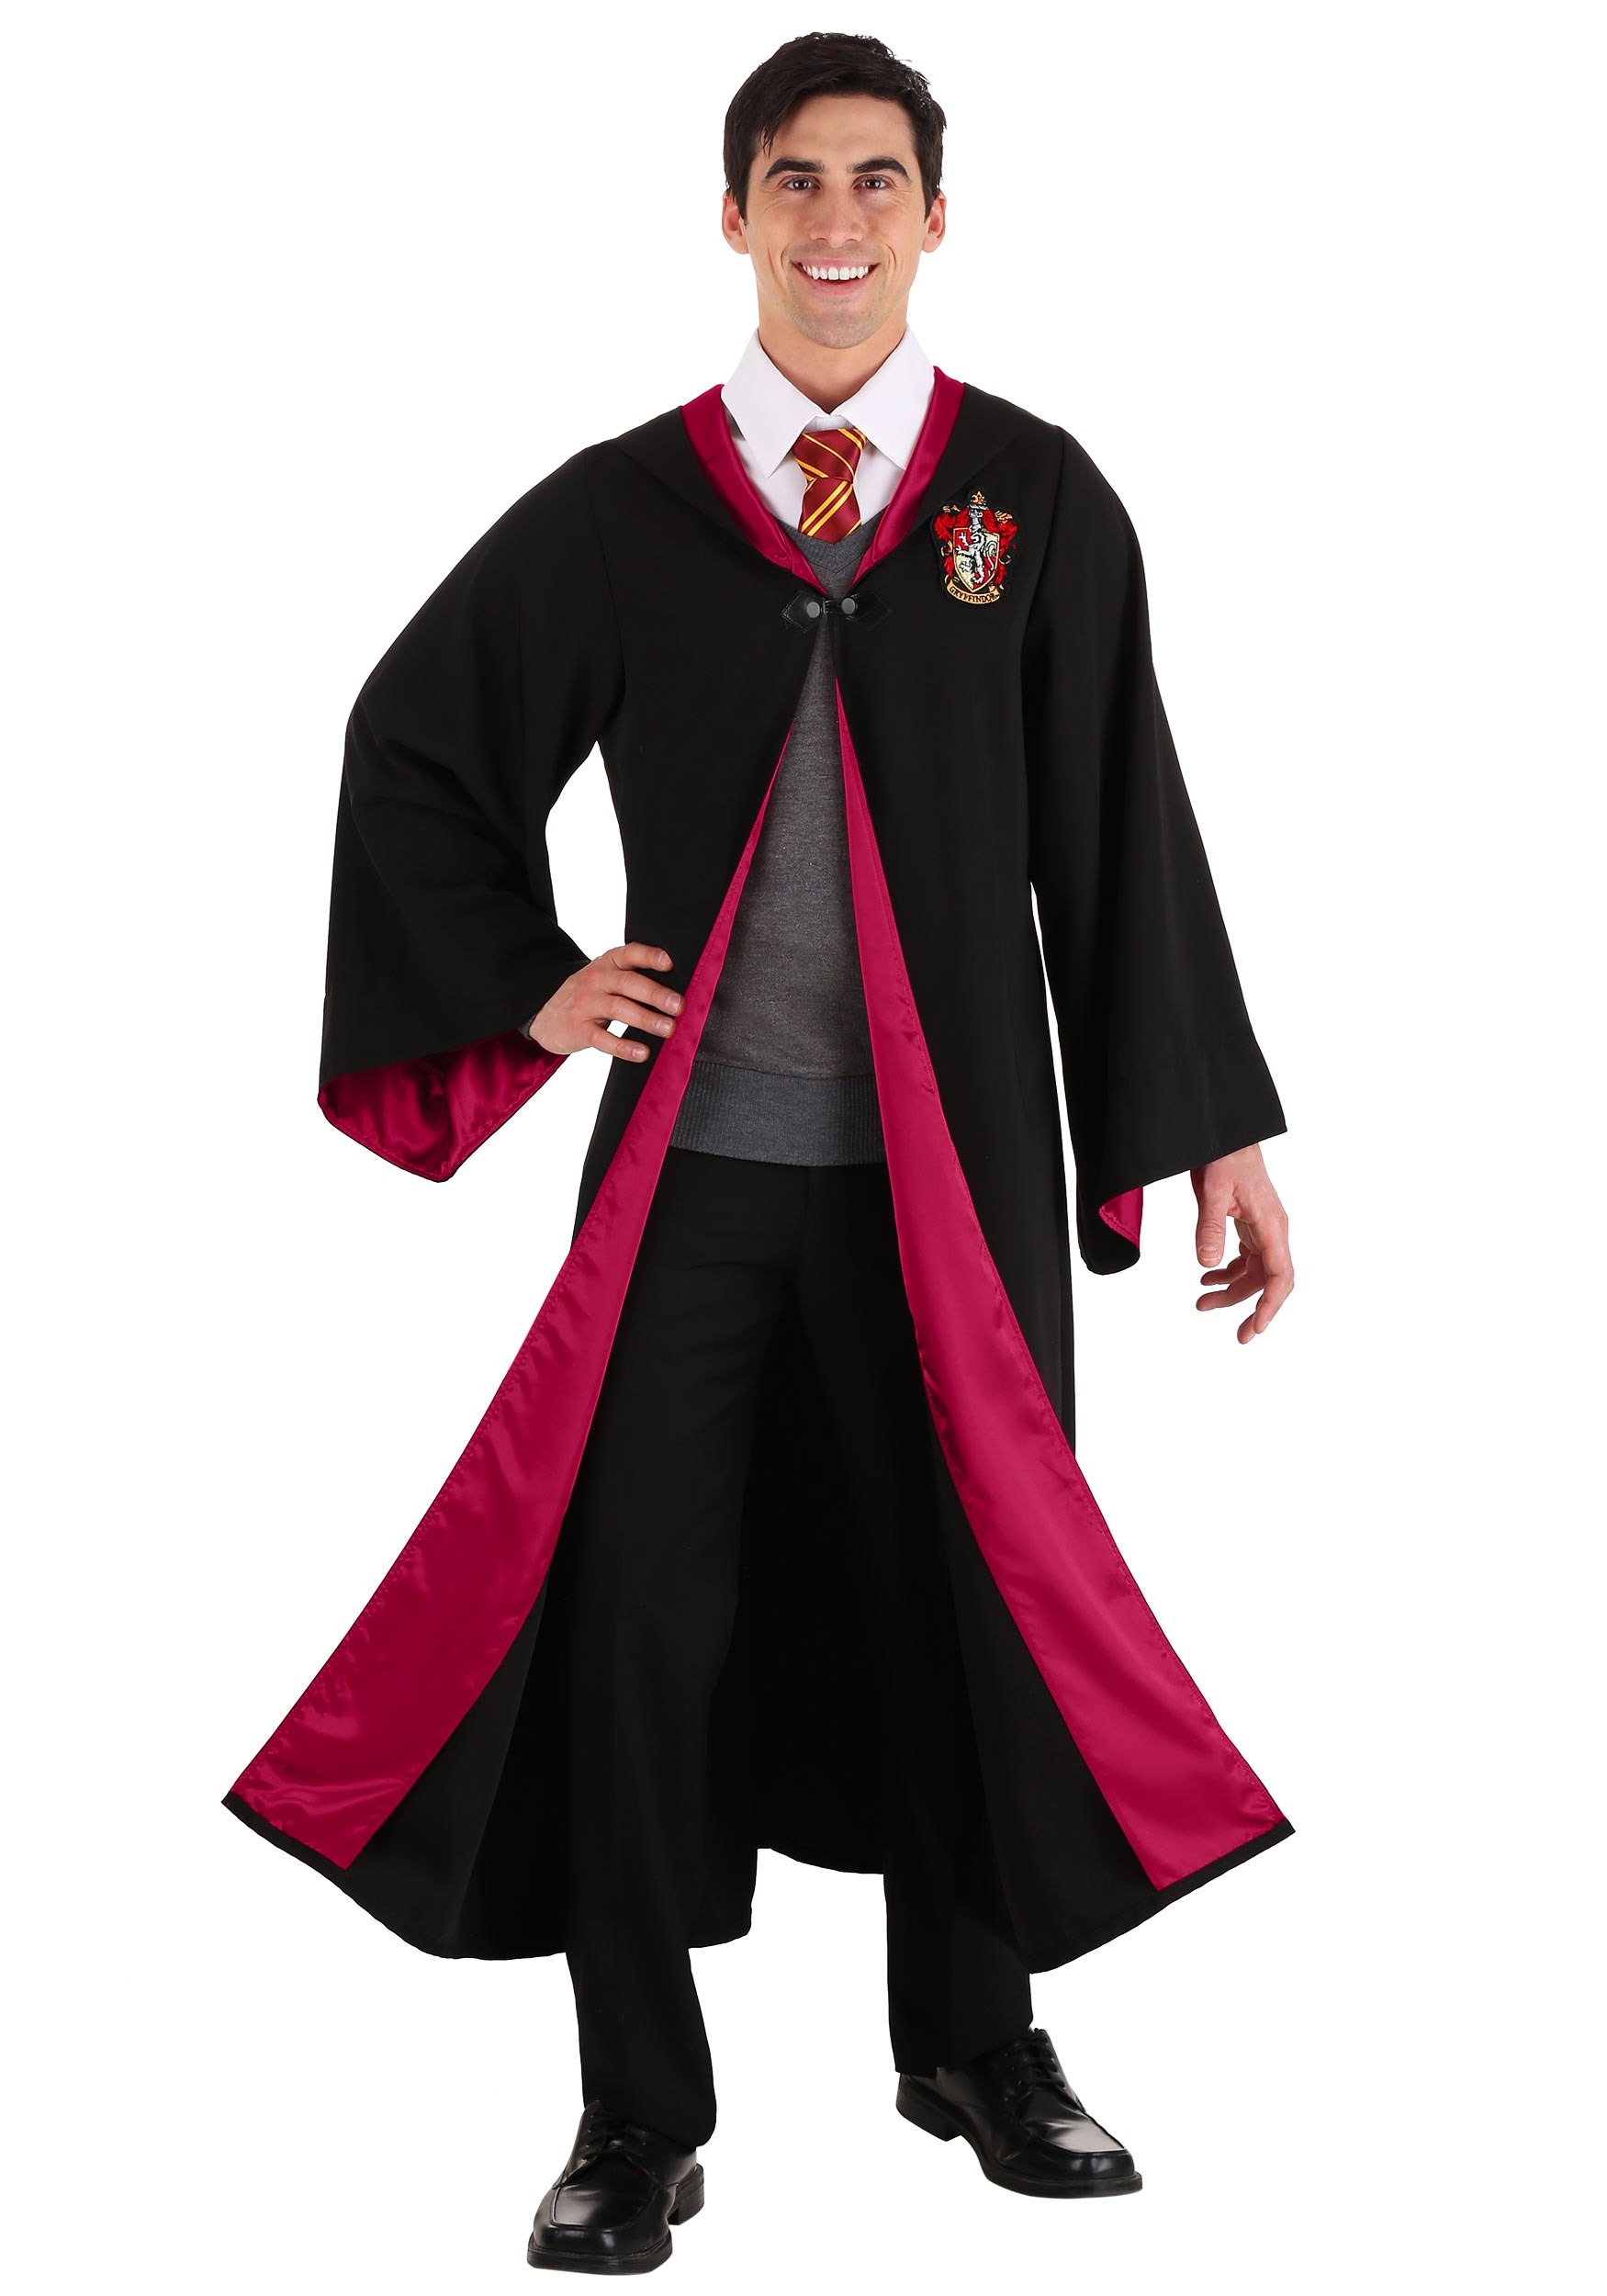 Image of Deluxe Adult's Harry Potter Costume ID FUN1444AD-XL